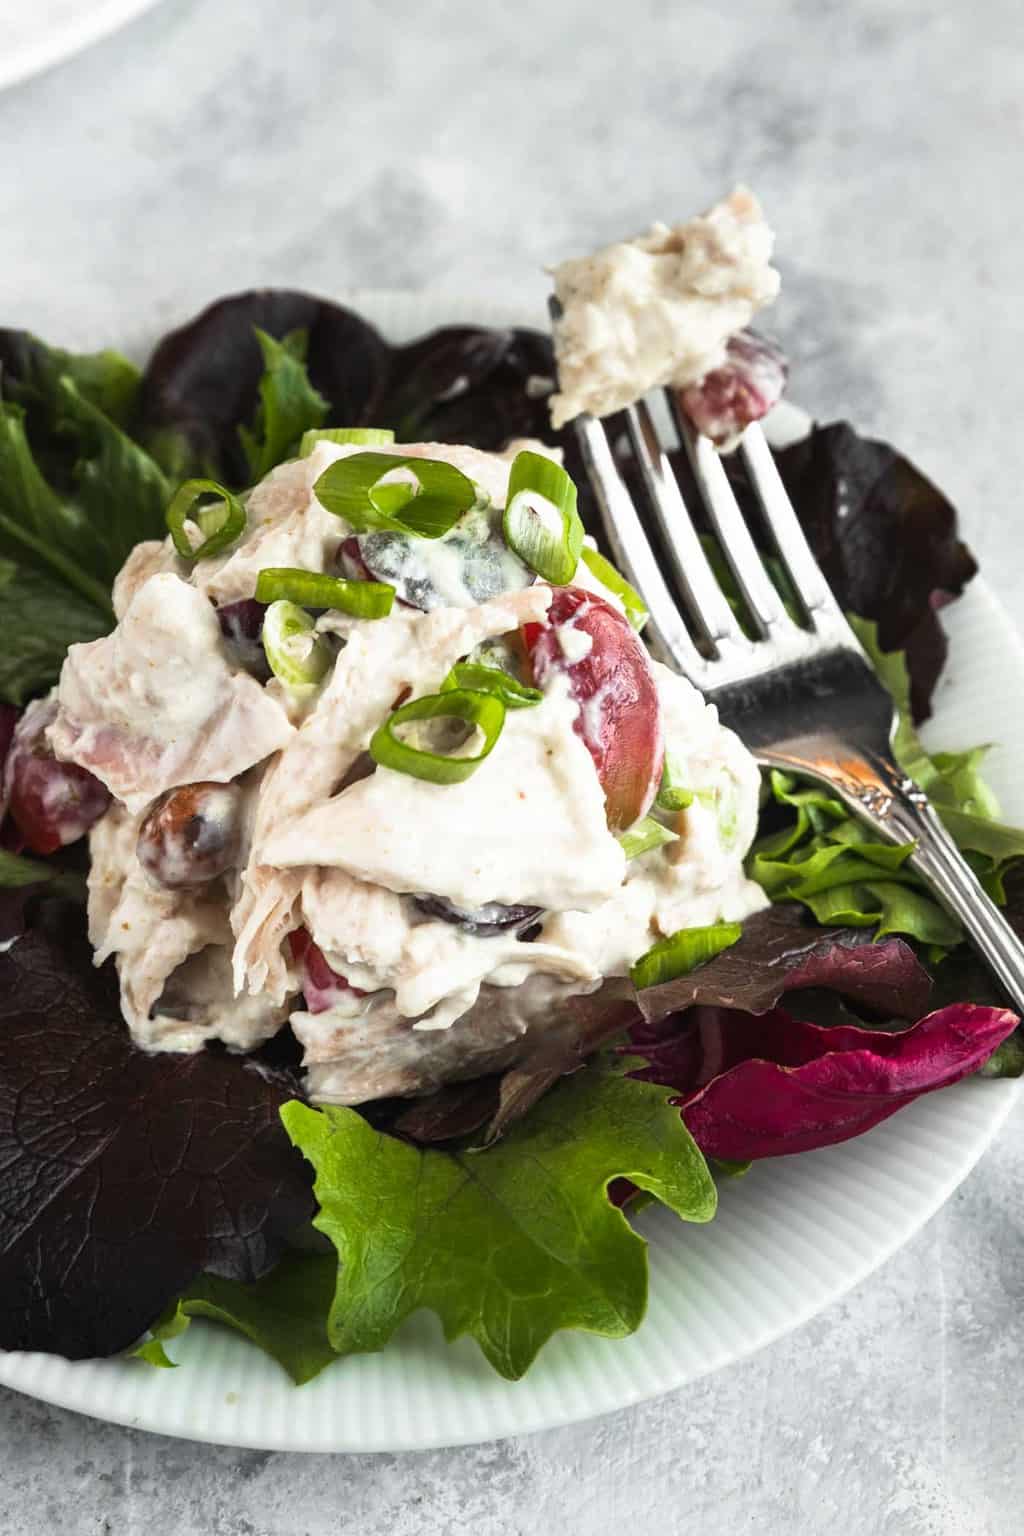 photo of all the fixings and add-ons for the best chicken salad recipe by top Houston lifestyle blogger Ashley Rose of Sugar & Cloth